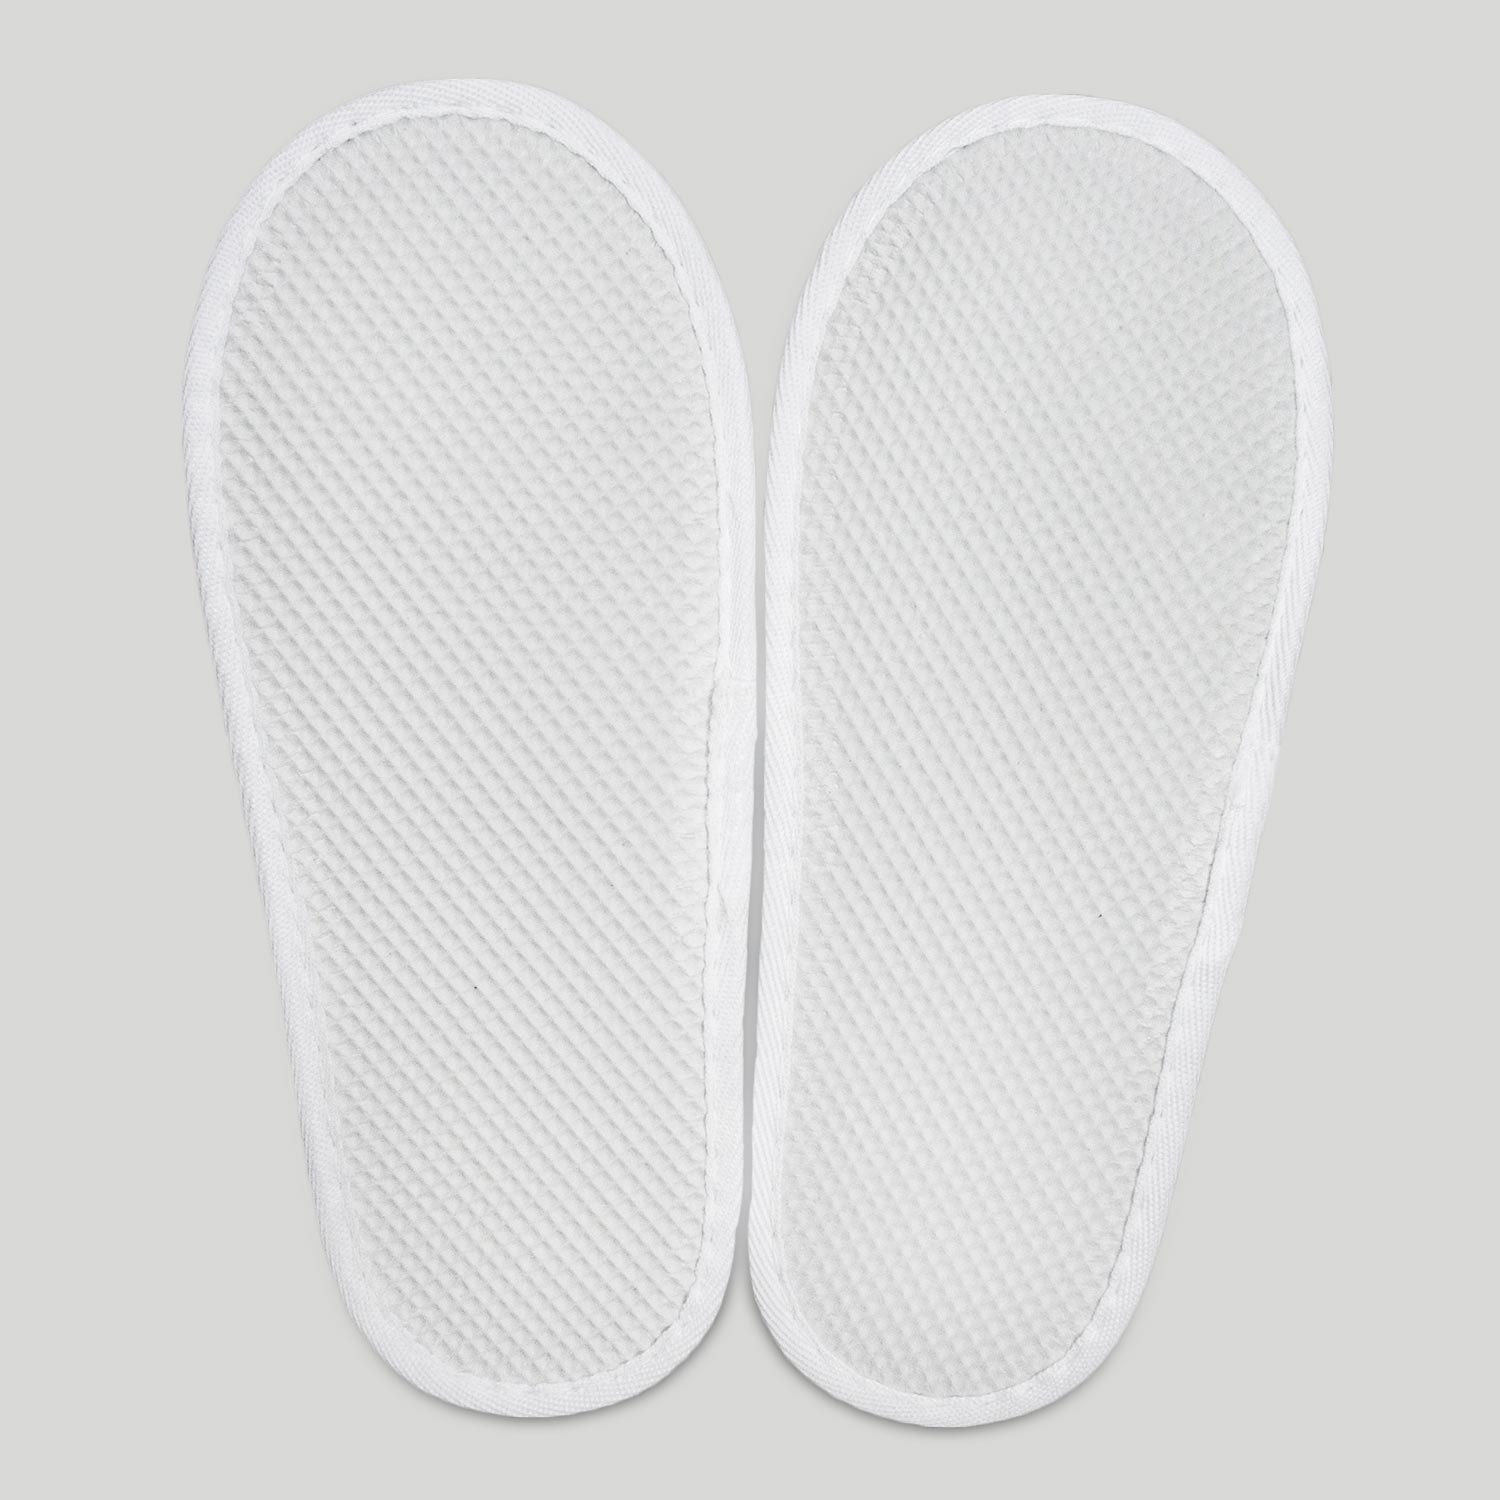 Accessories :: Hotel and Spa Slippers :: White Open Toe Kids Velour ...